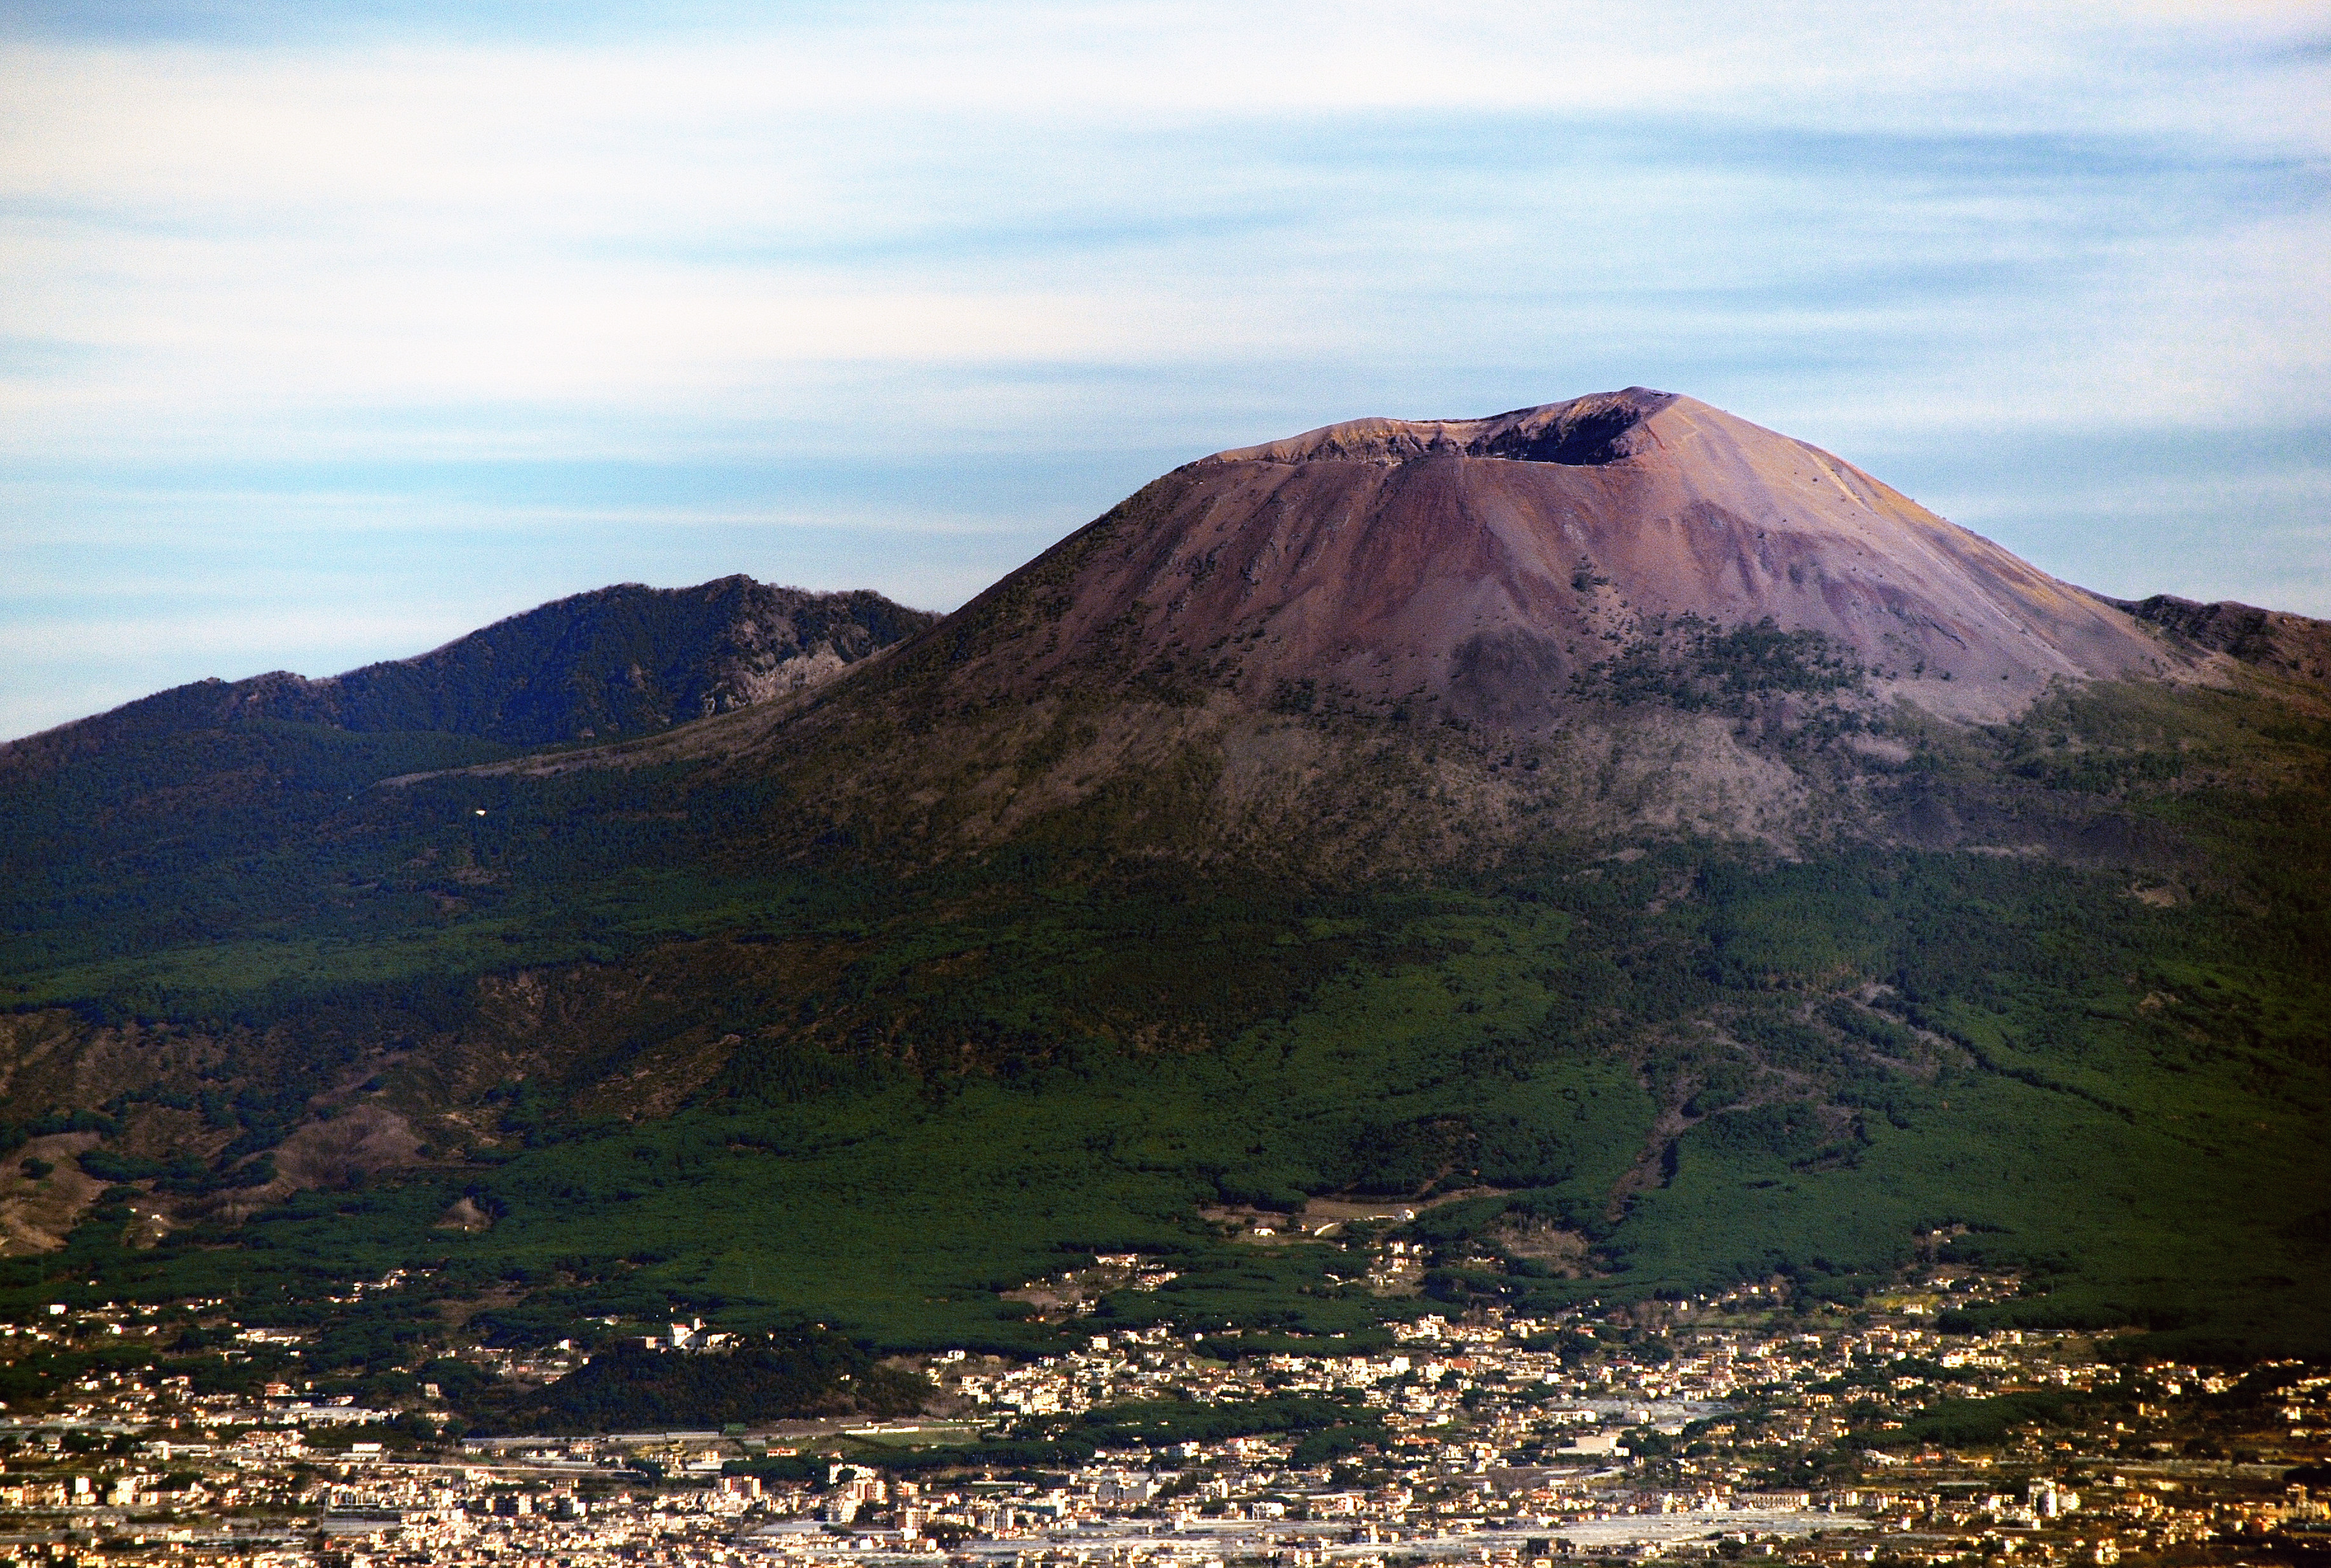 Mt. Vesuvius as seen from above Sorrento. (Bruno Brunelli—Getty Images)